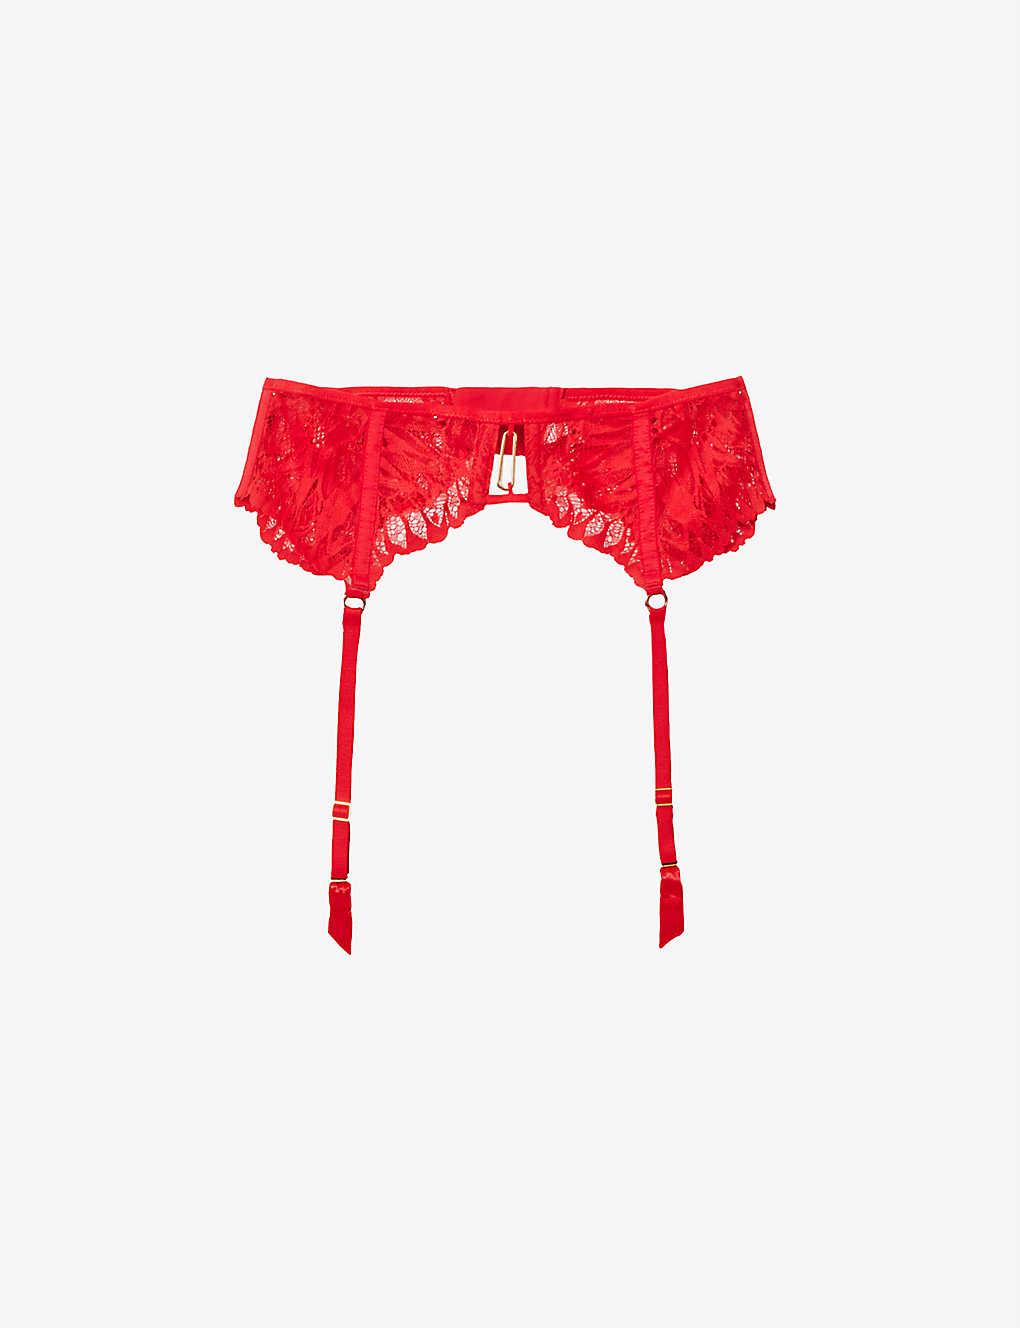 Aubade Flowermania Stretch-lace Suspender Belt in Red | Lyst